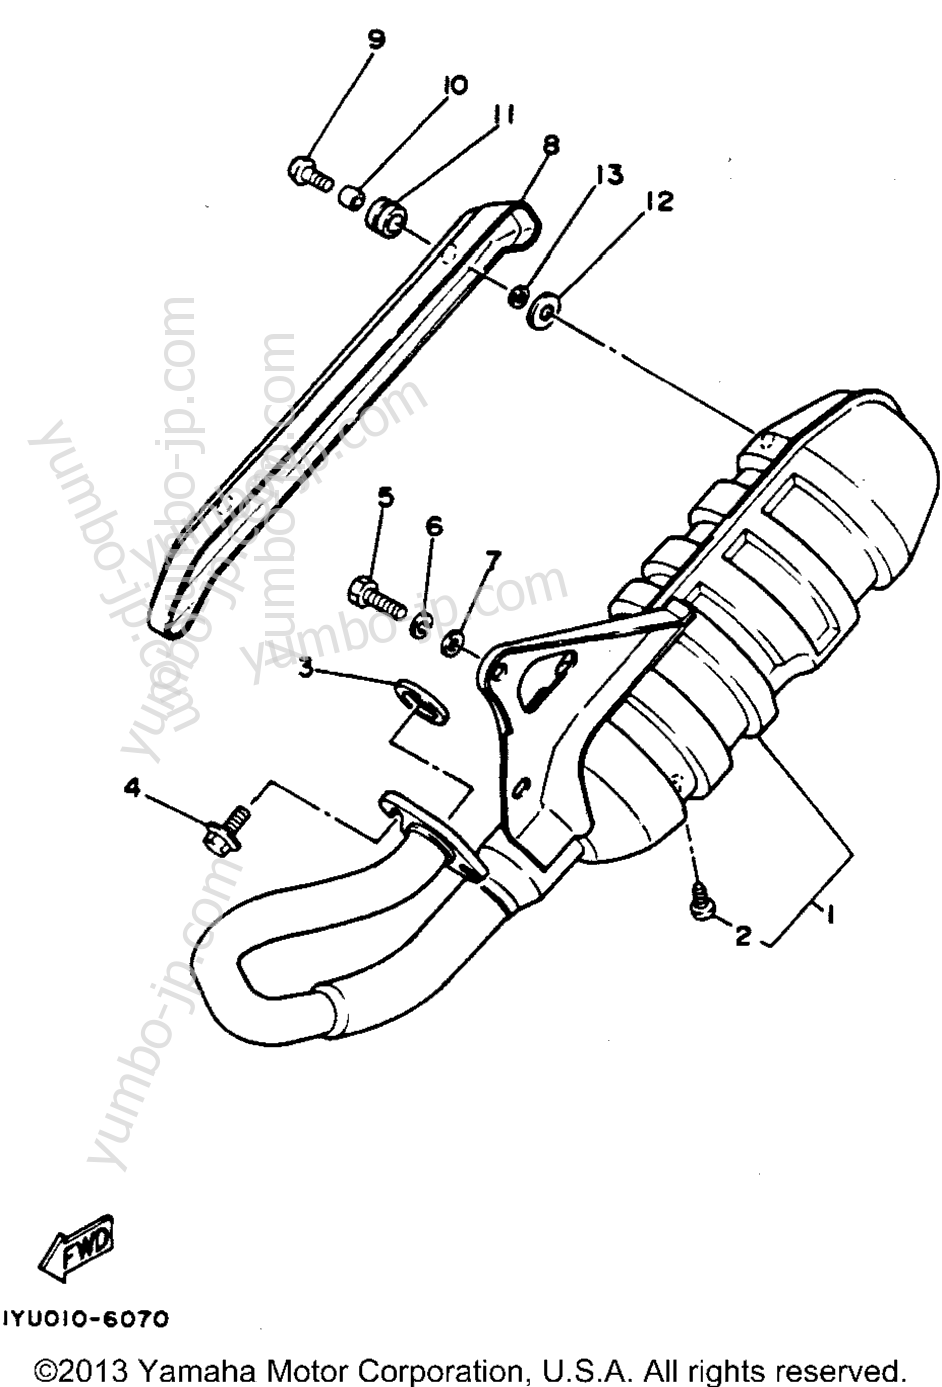 Exhaust for scooters YAMAHA RAZZ (SH50E) 1993 year